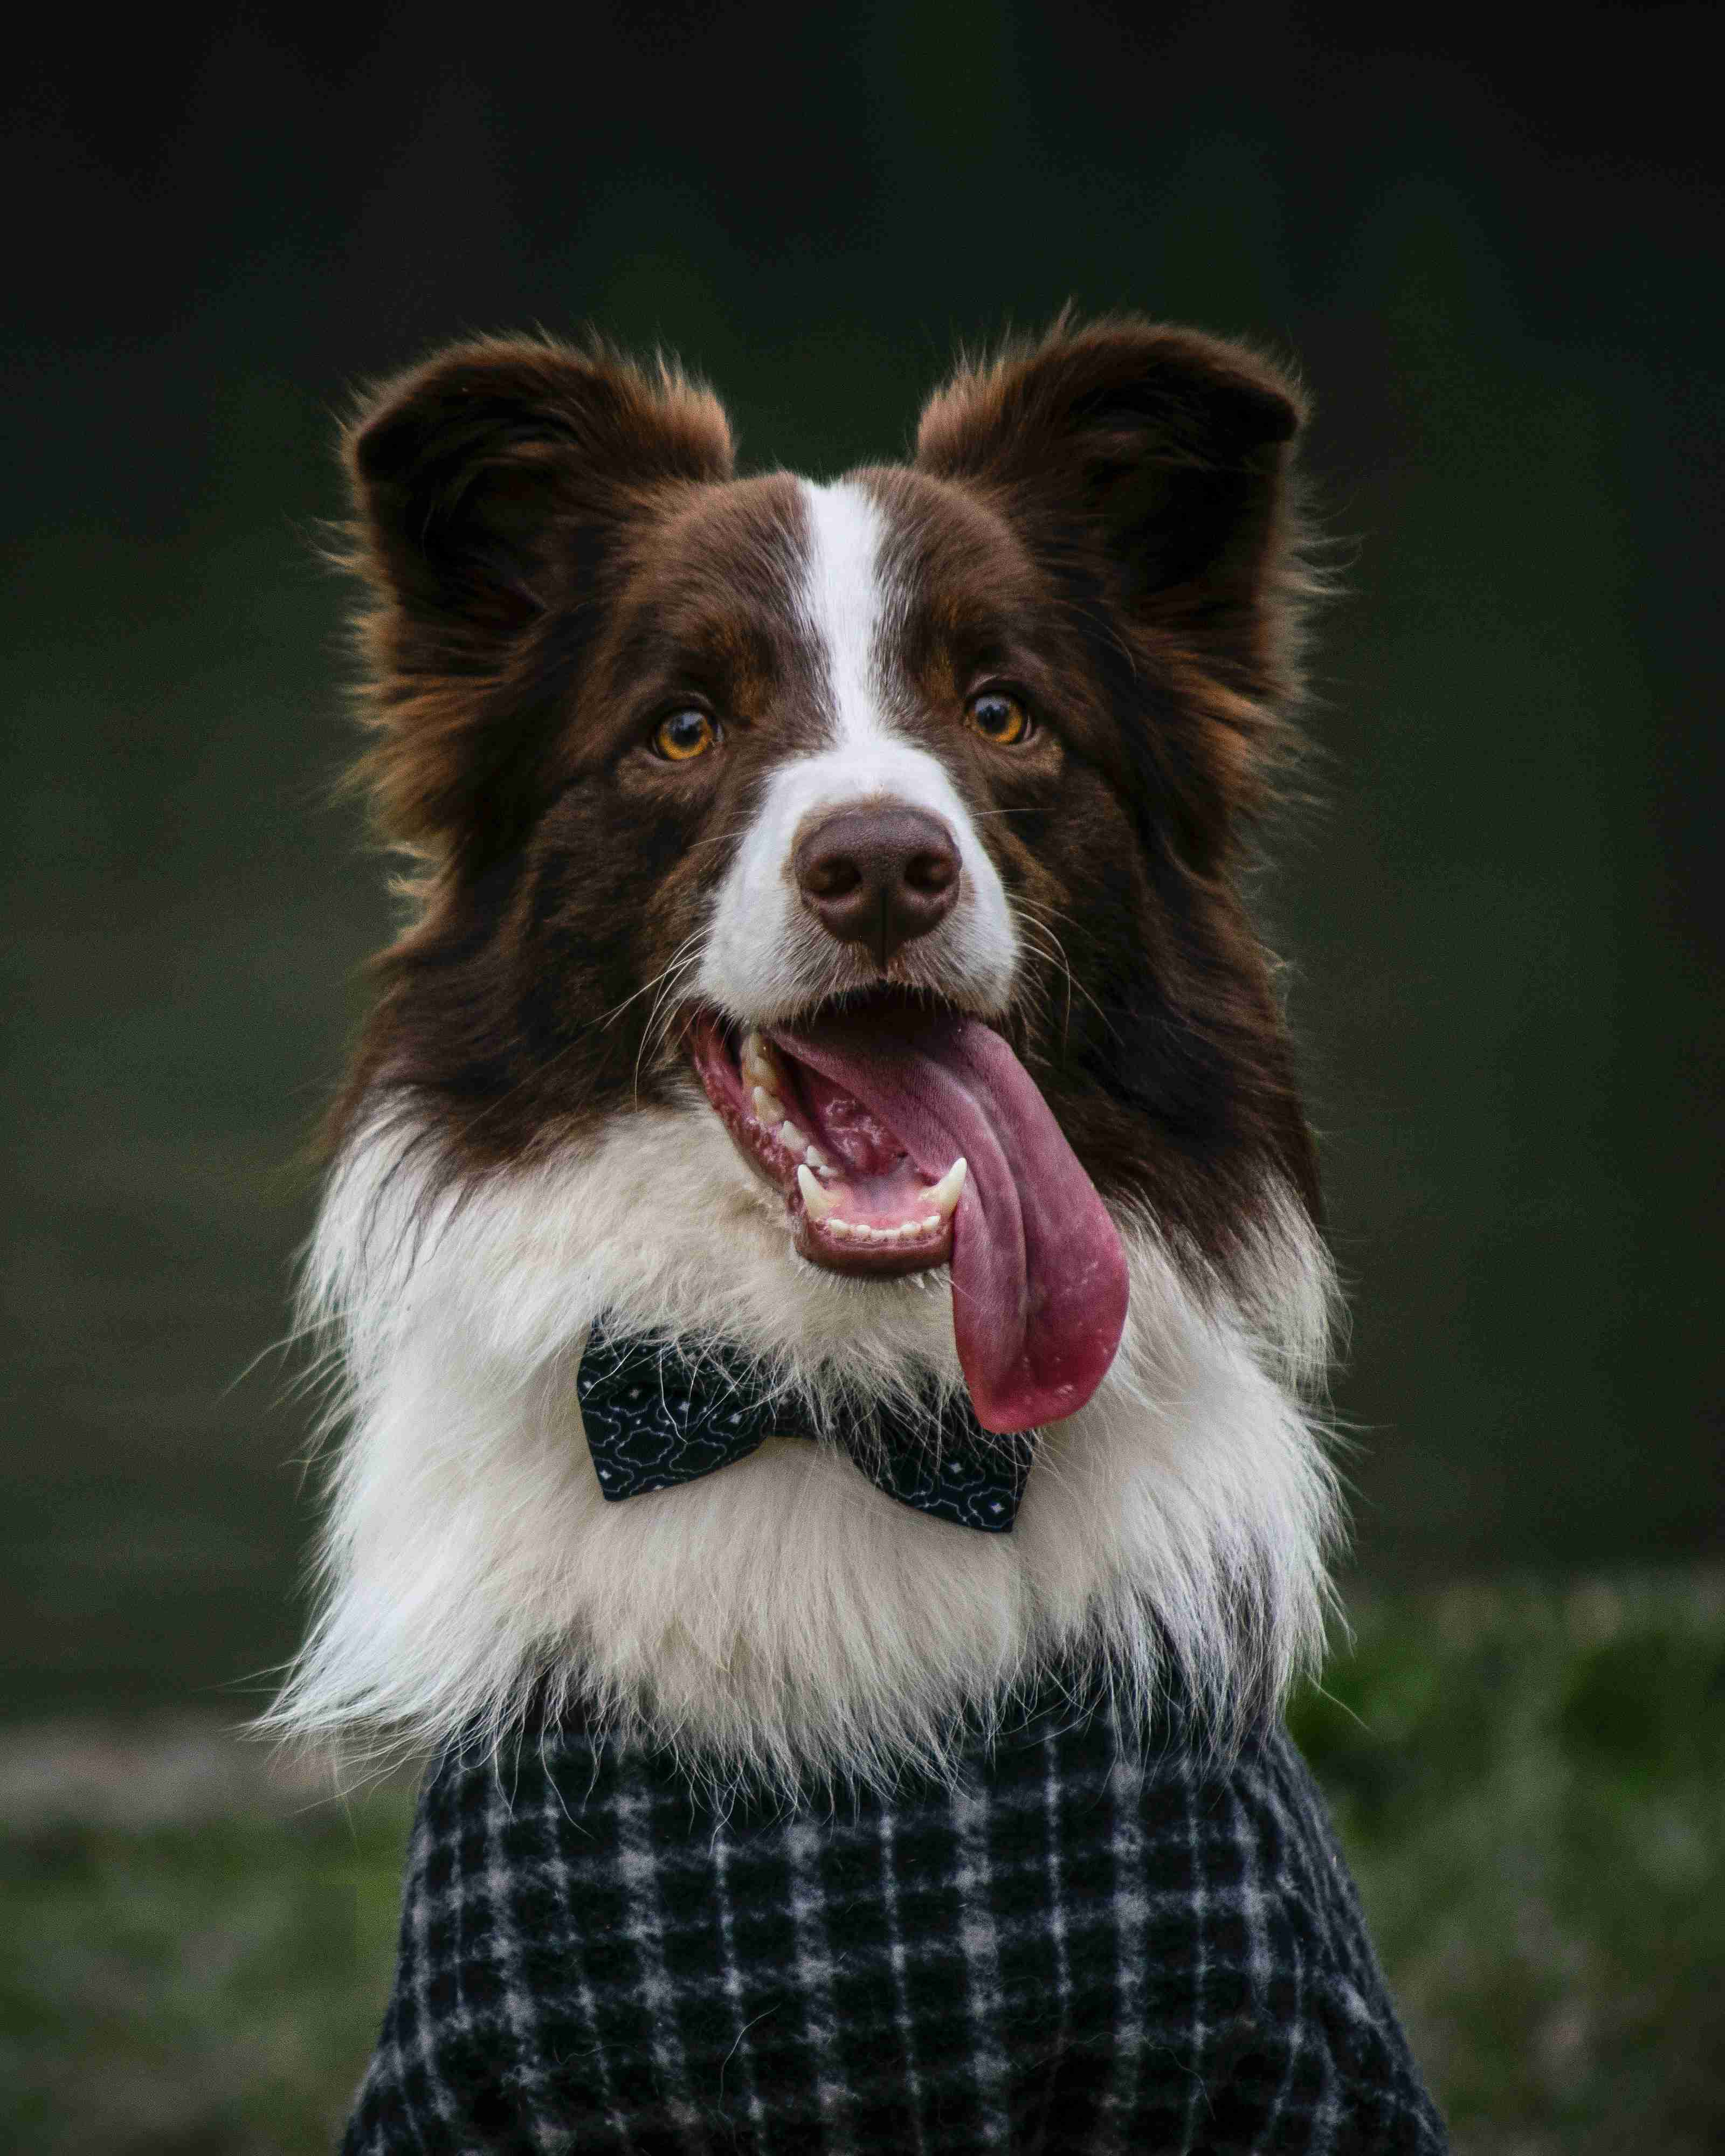 Is Your Border Collie Suffering from Allergies? Look Out for These Telltale Signs